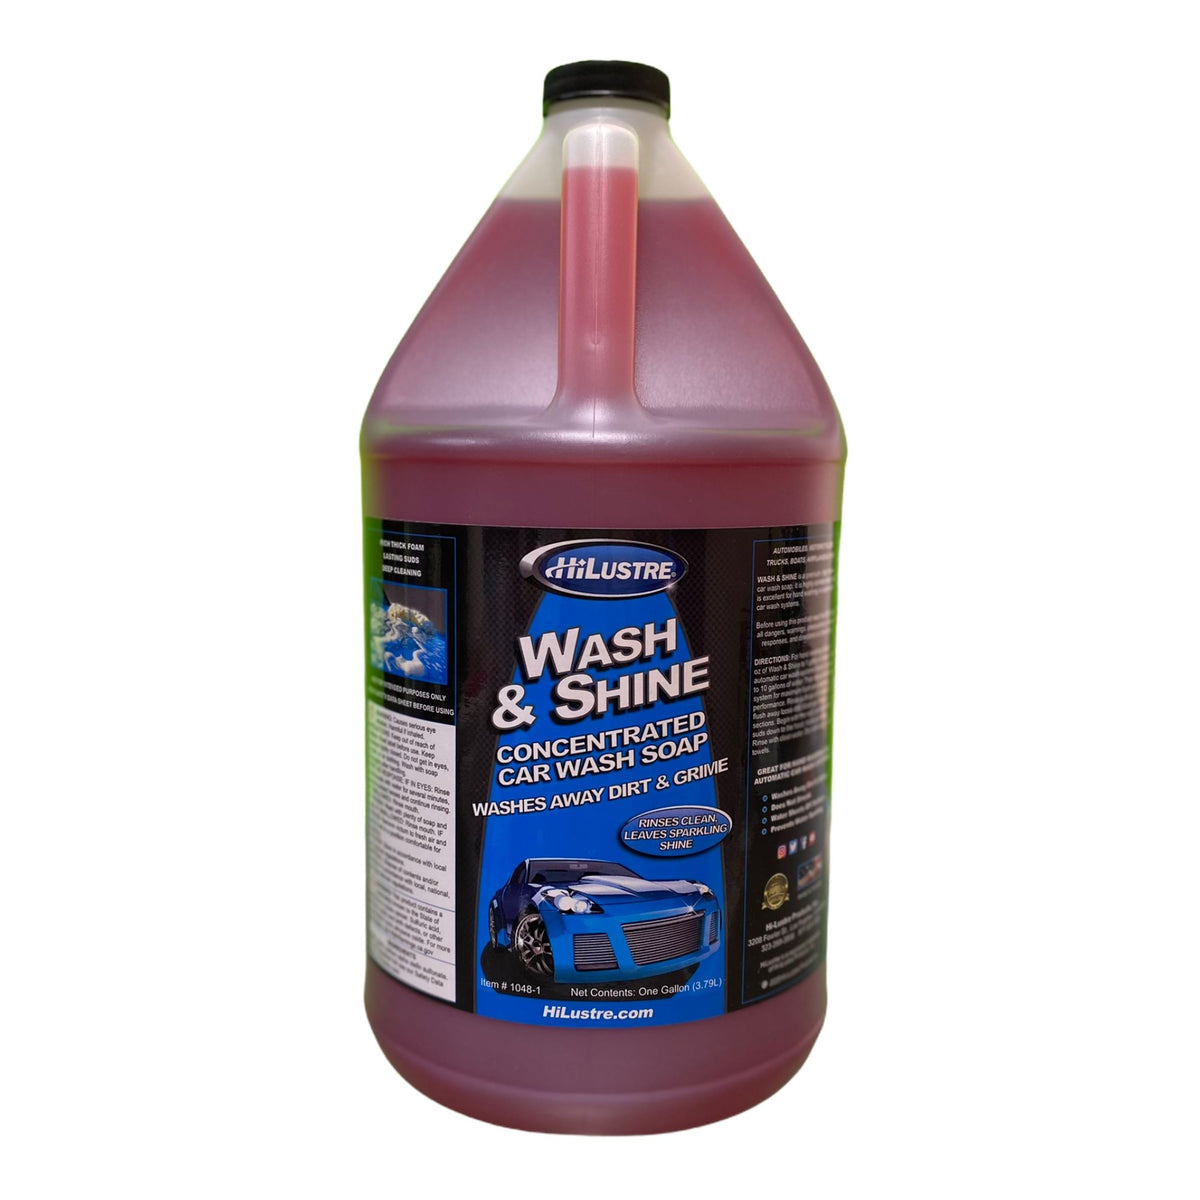 Wash & Wax - Premium Car, RV, and Truck Soap 5 Gallon by Image Wash Products, Concentrated Soap Infused with Carnauba Wax, Biodegradable, High Quality